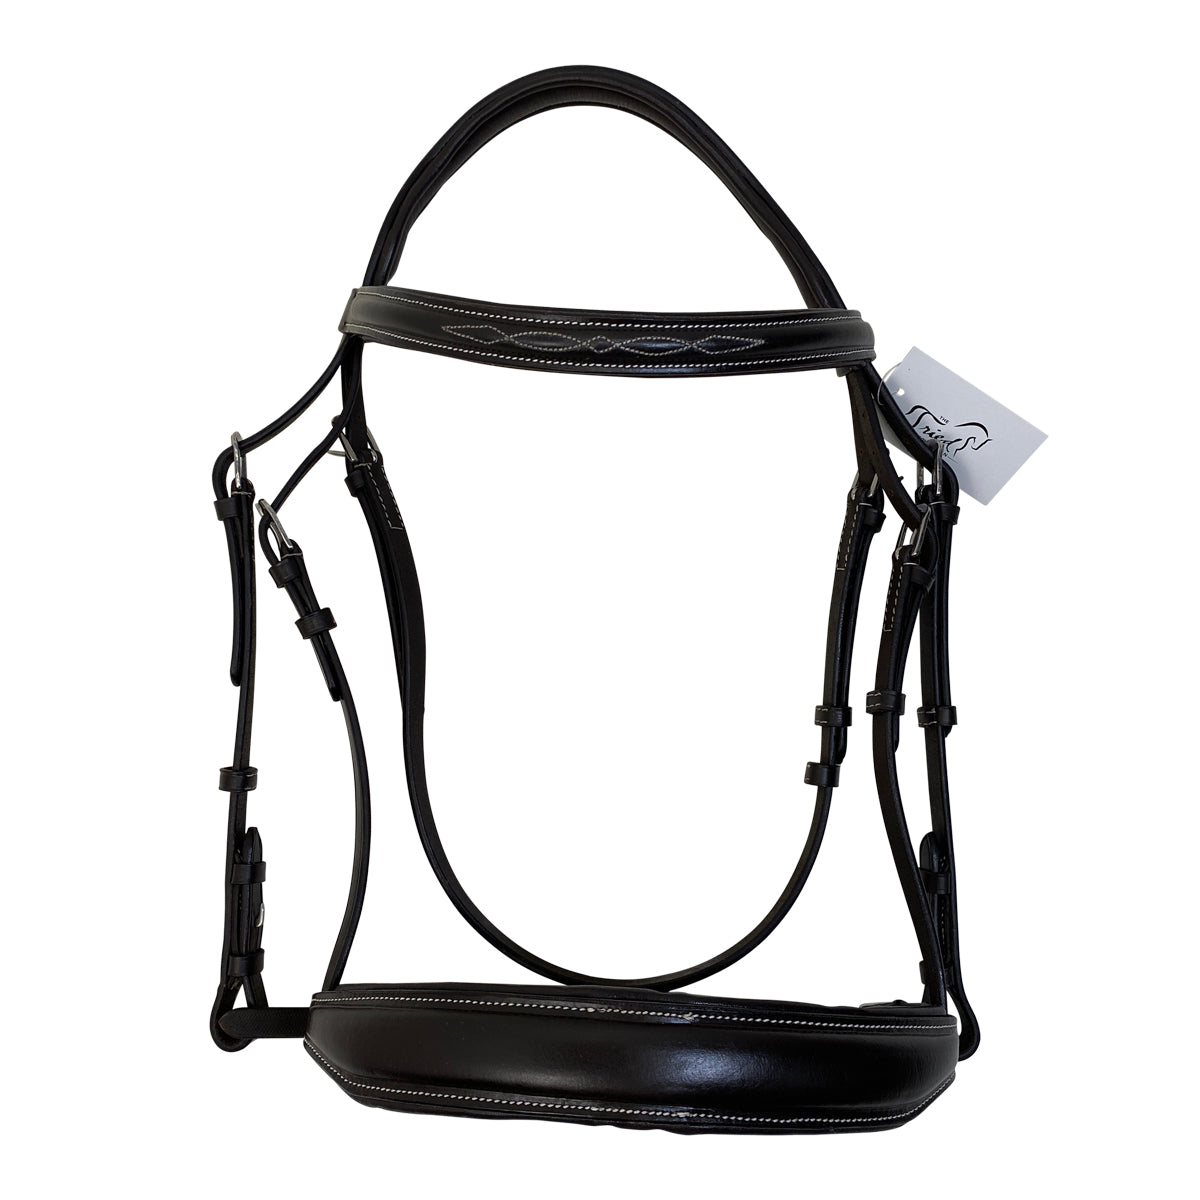 Fancy Raised Padded Bridle w/Crank Noseband in Chocolate